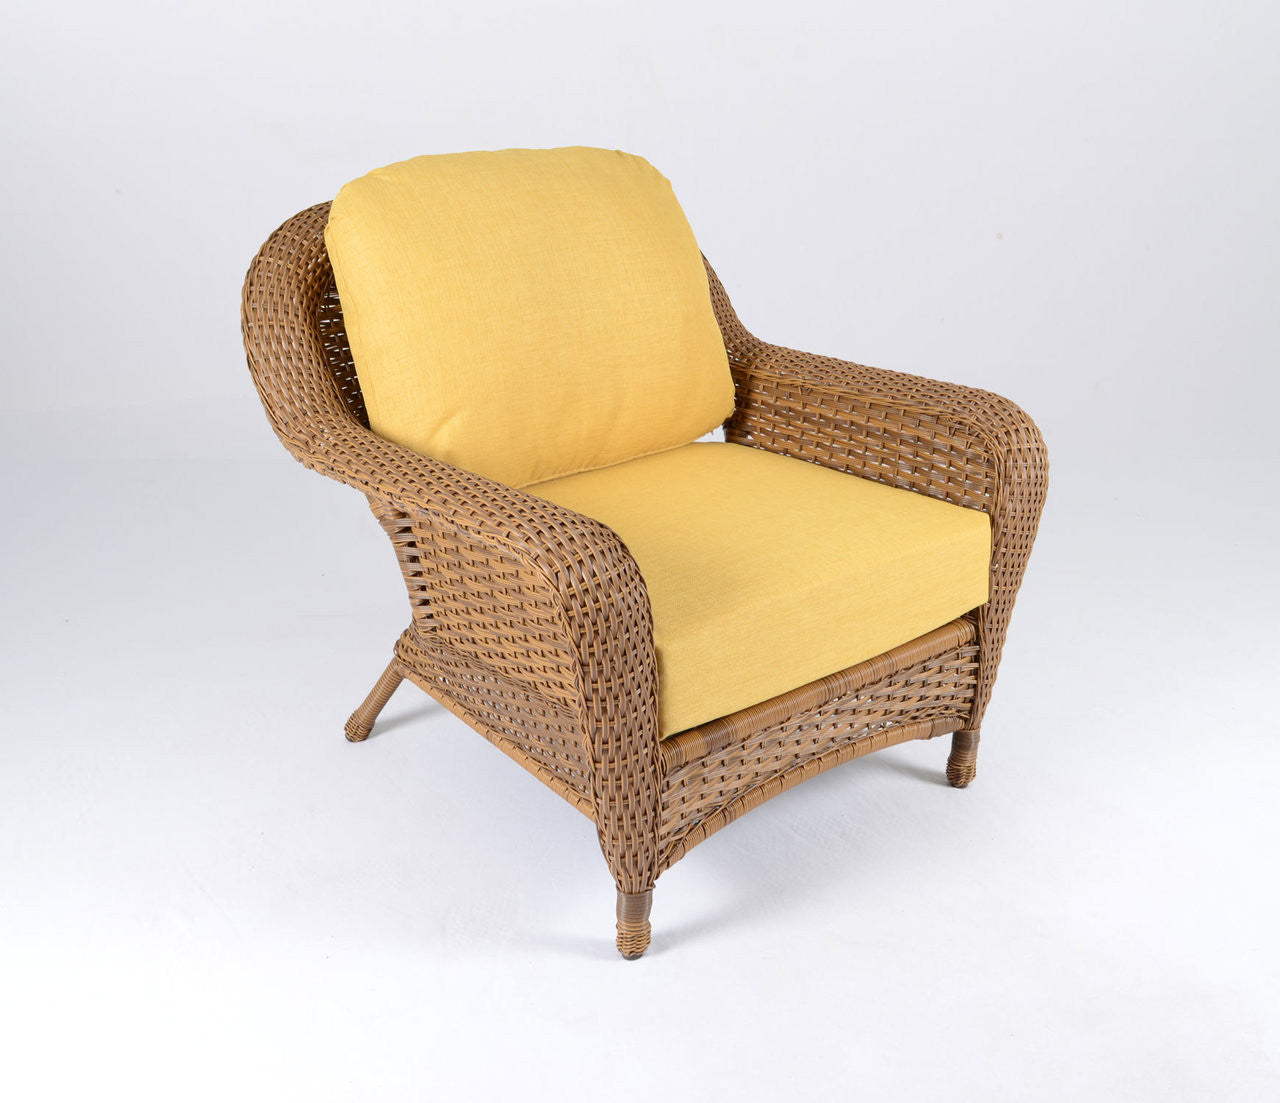 Tortuga Outdoor Sea Pines Resin Wicker Club Chair